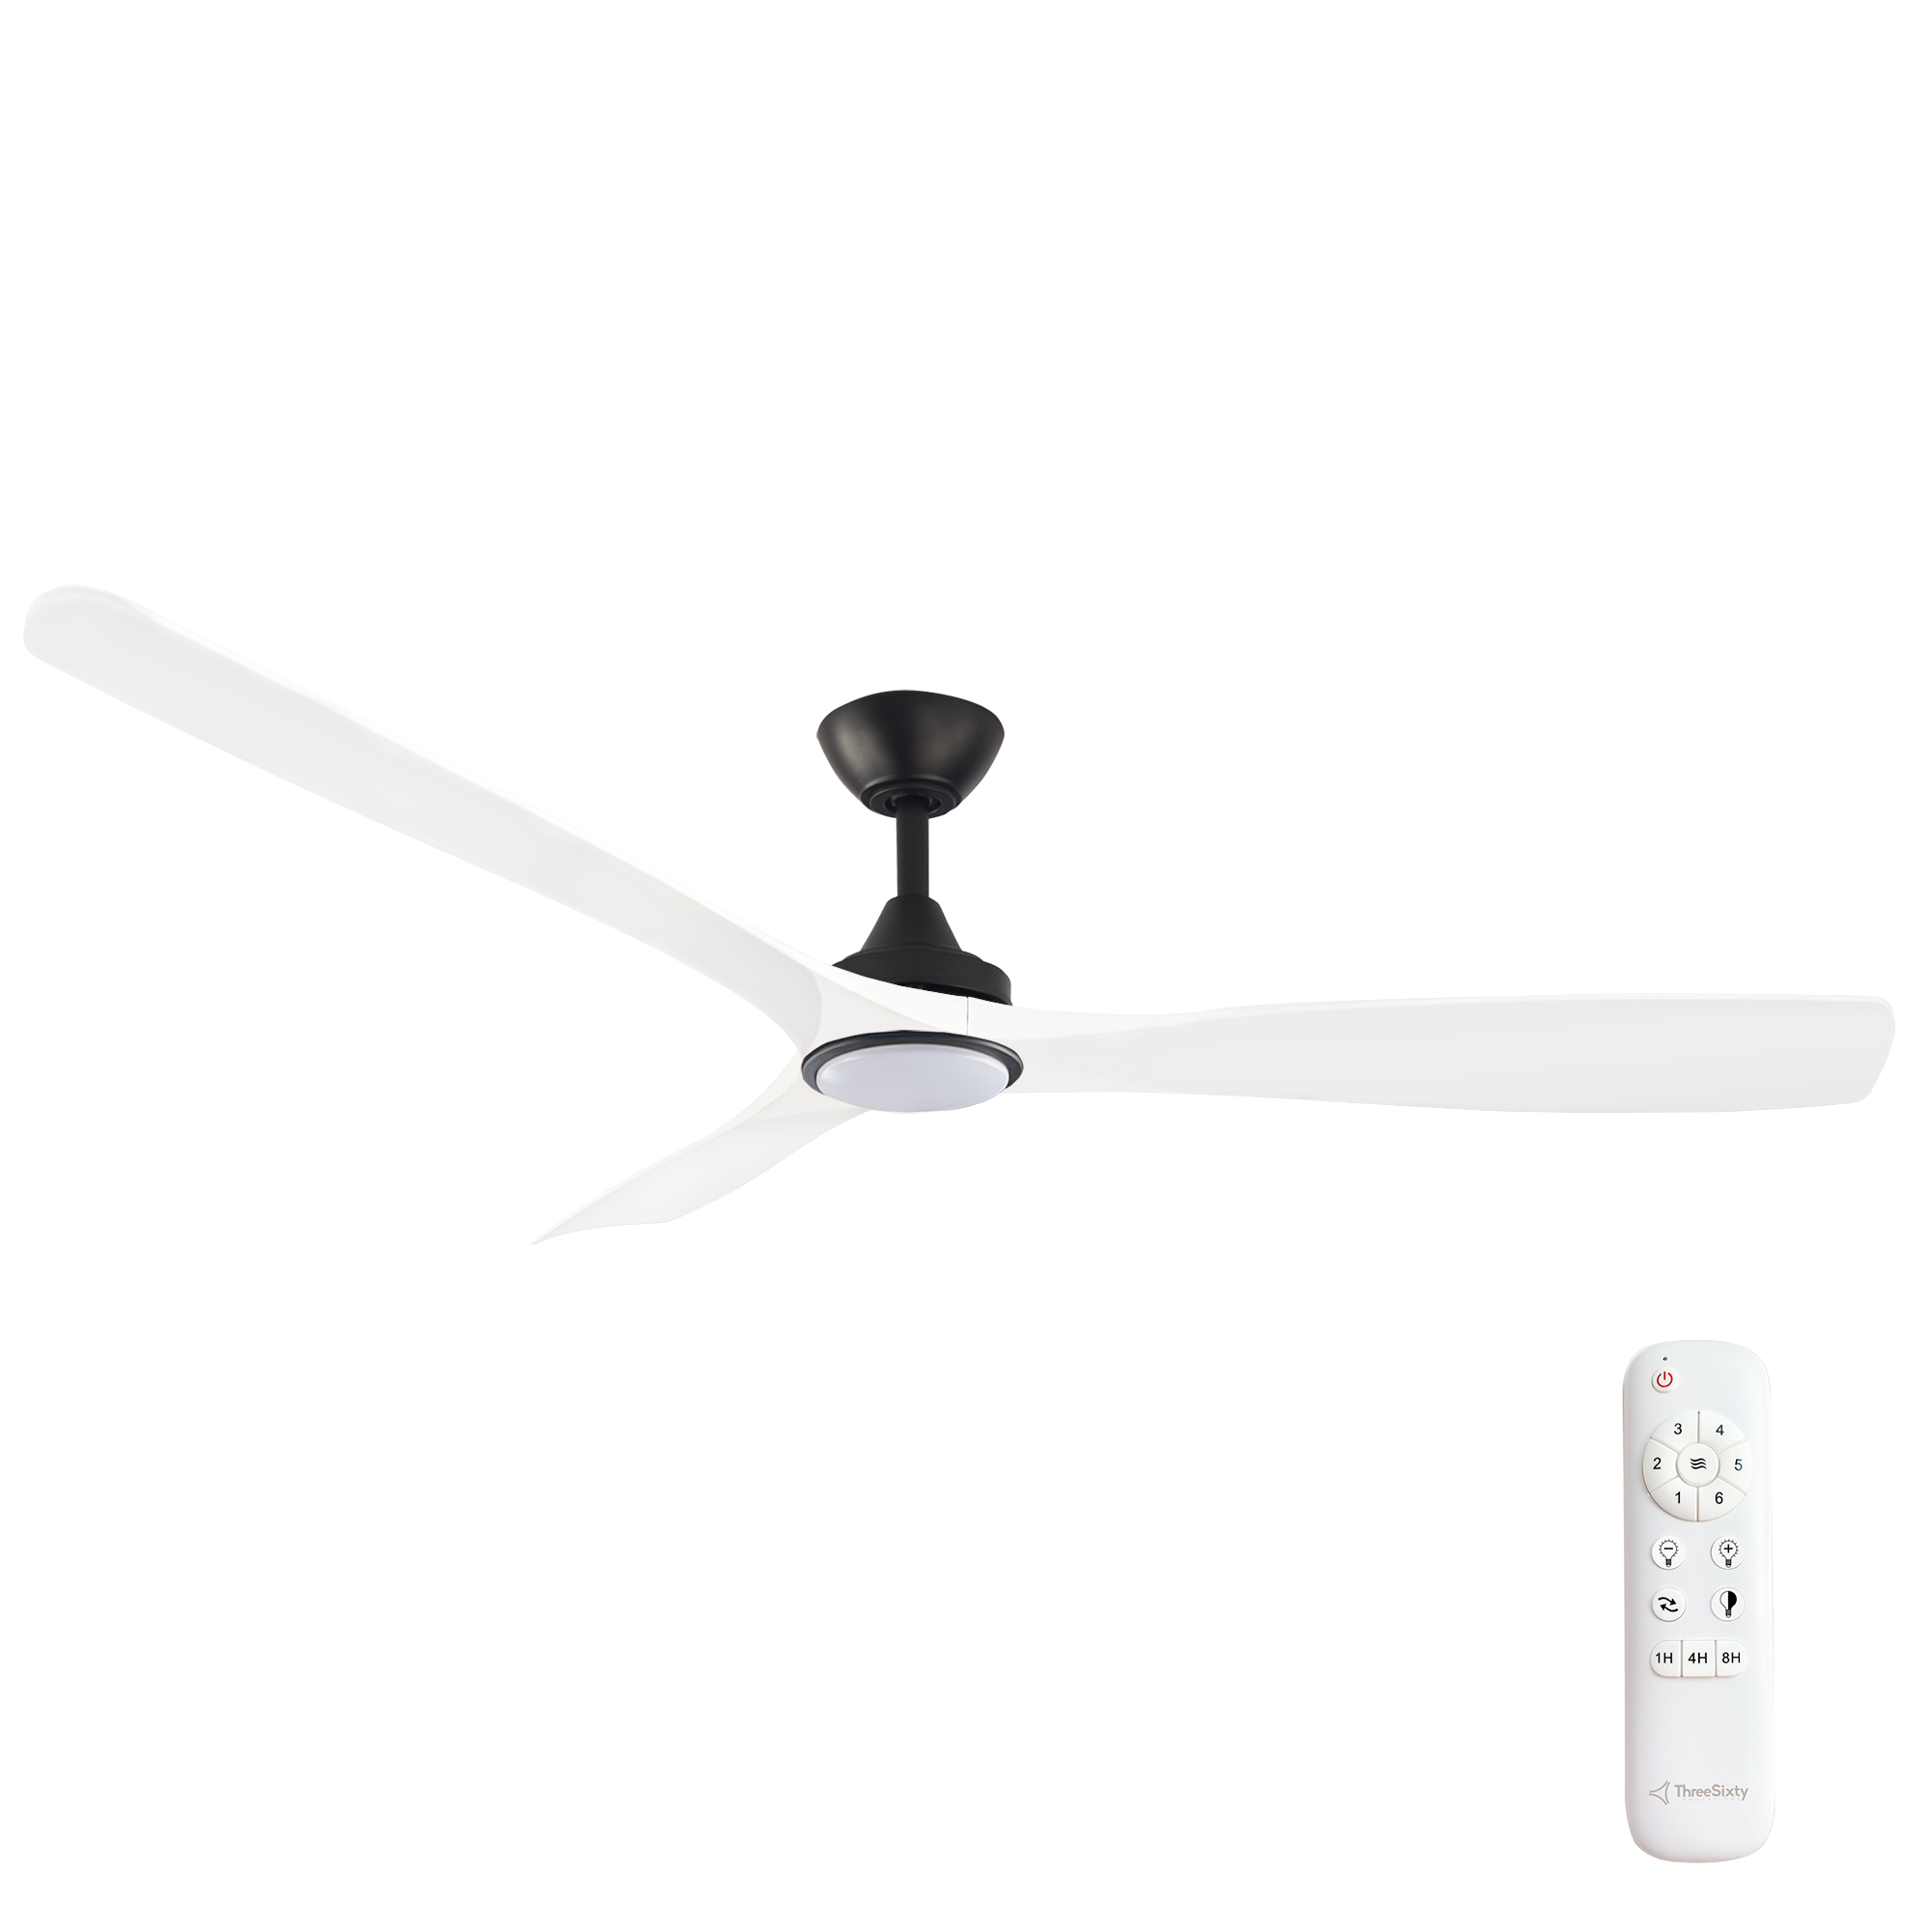 60" Spitfire DC Ceiling Fan in Black with White blades and 18W CCT LED Light